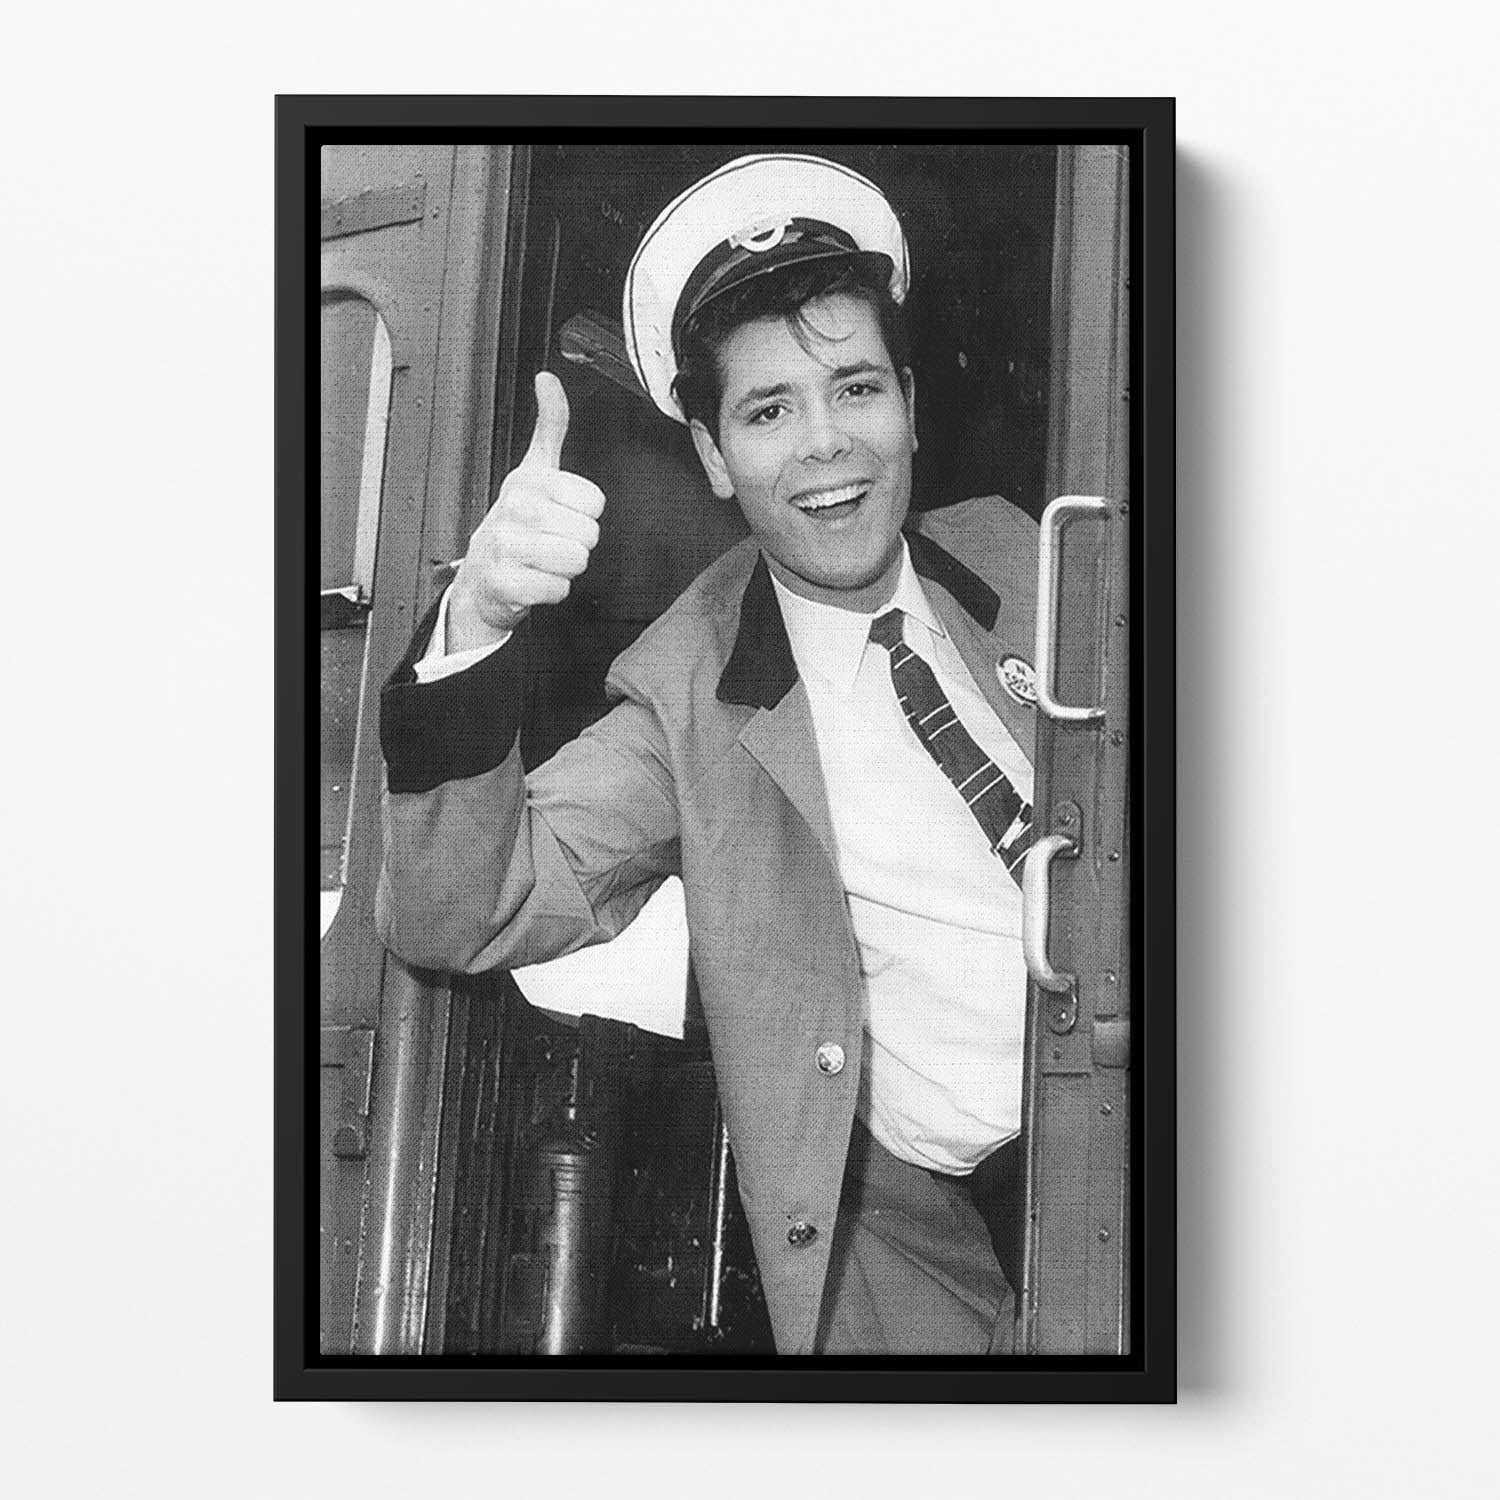 Cliff Richard on a bus Floating Framed Canvas